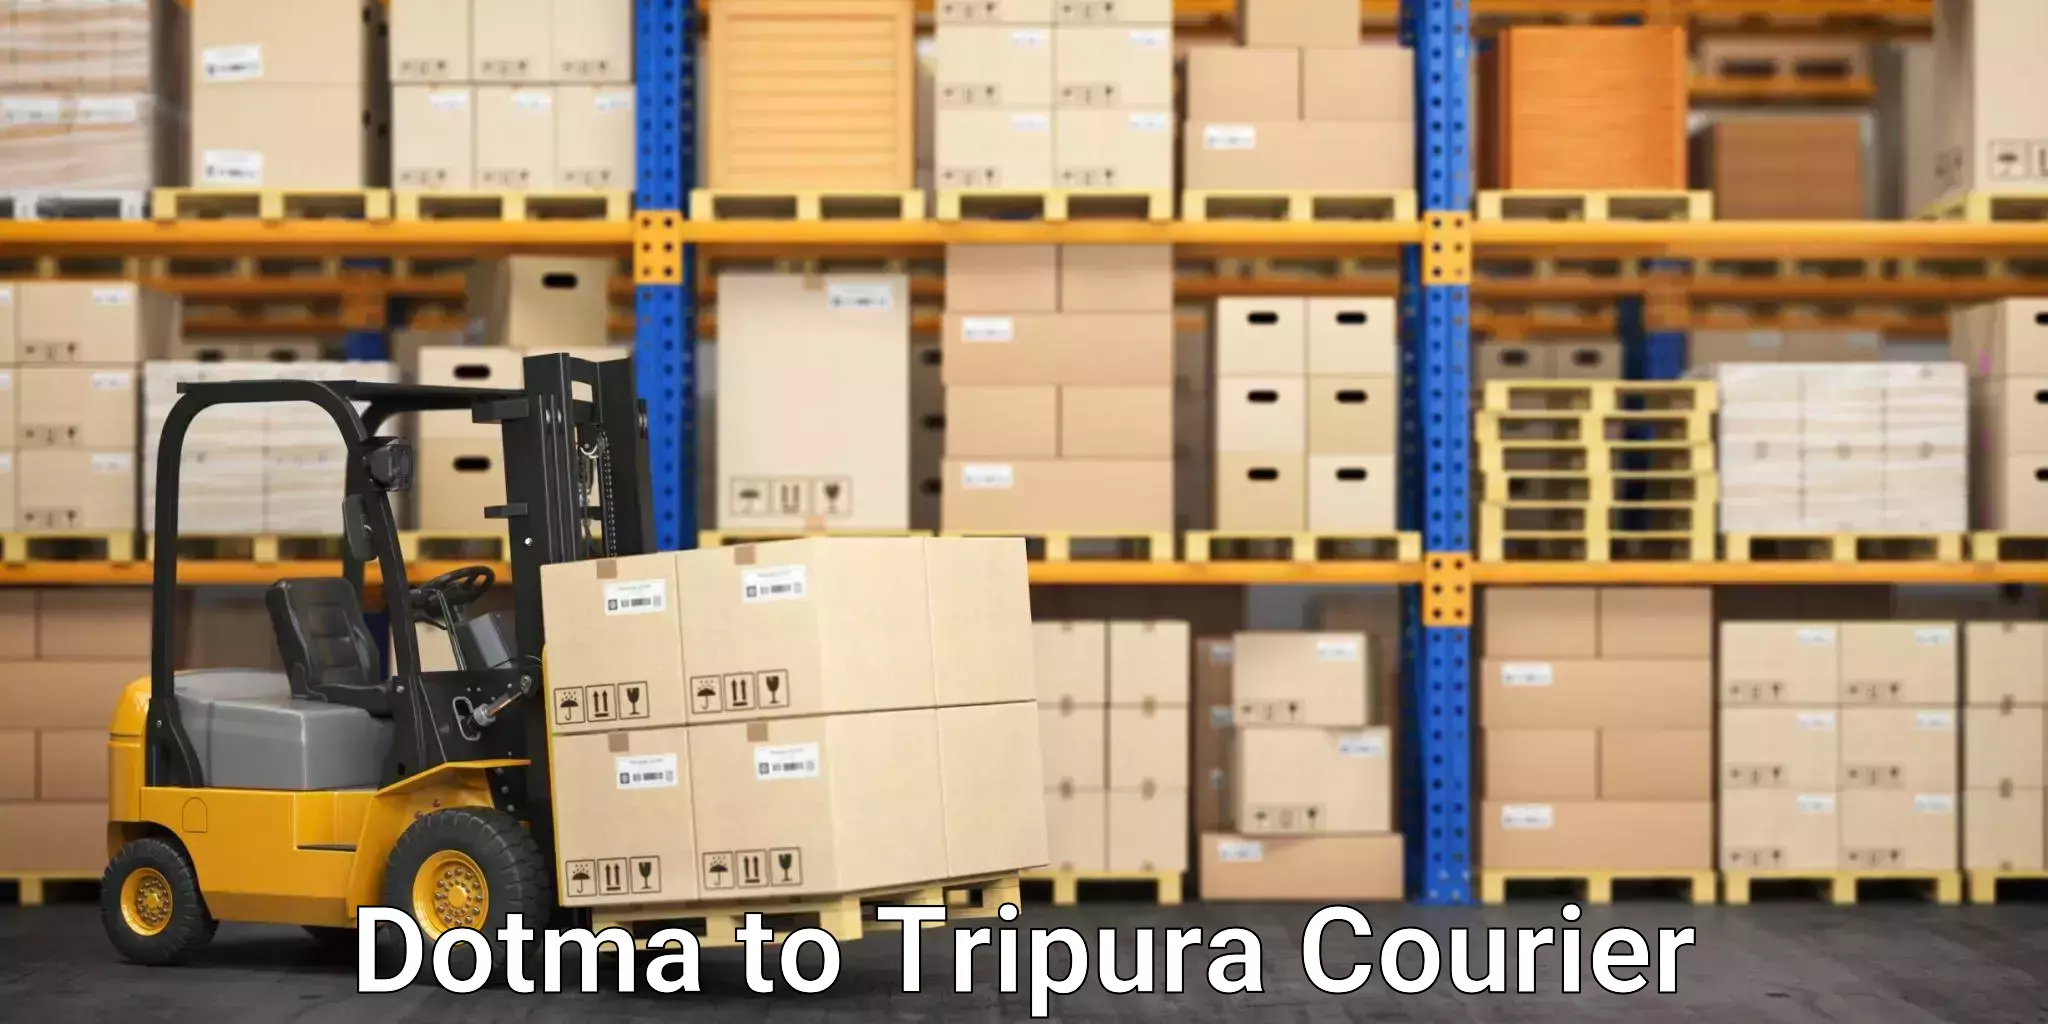 Discounted shipping Dotma to Udaipur Tripura